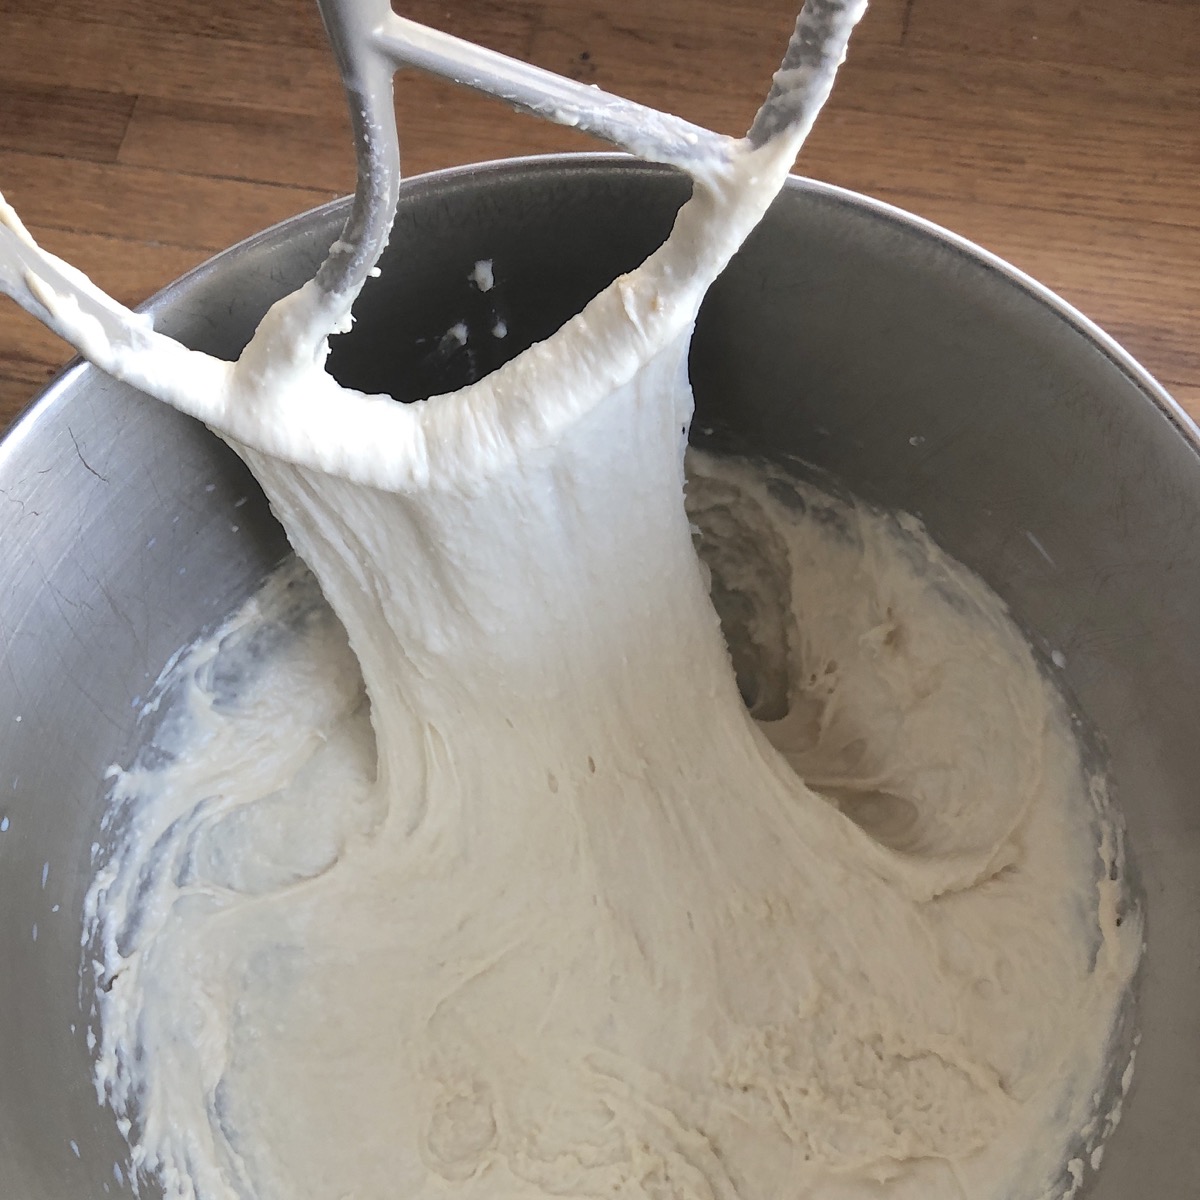 Soft yeast dough in bowl with the beater stretching some up and out, showing its gluten development.